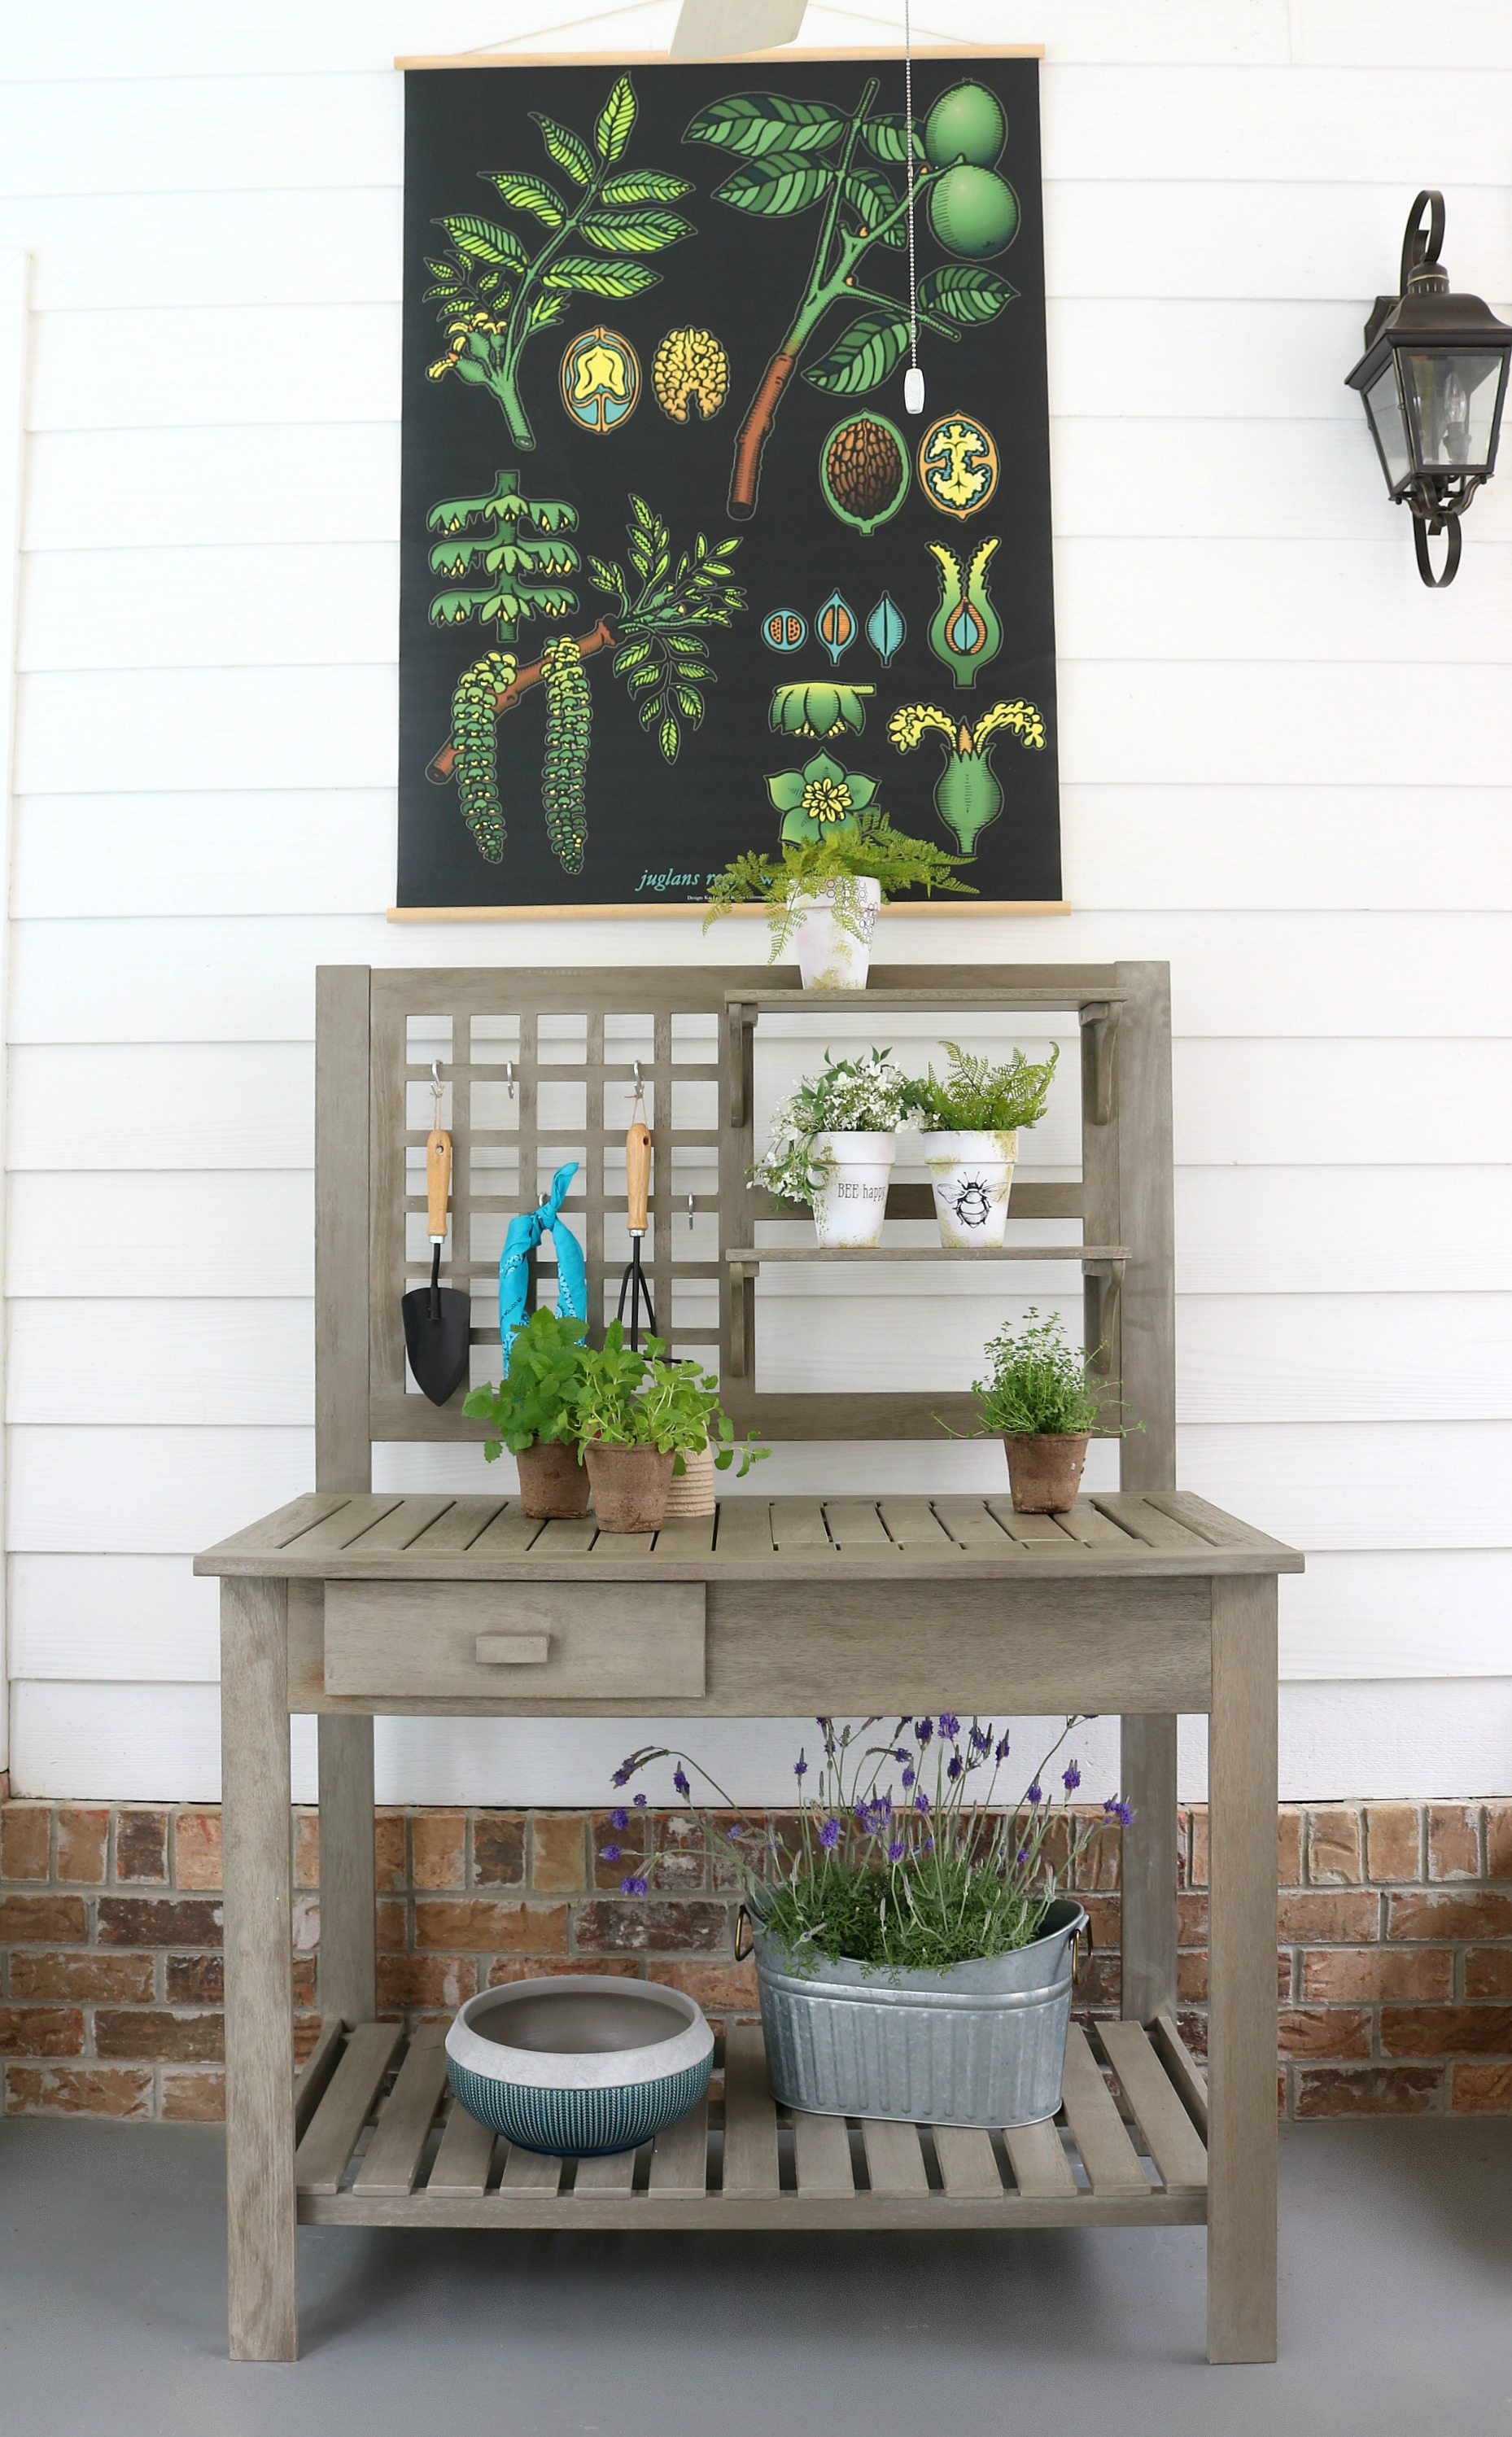 Multi-use potting bench - From planting flowers to entertaining family and friends, our newest addition to the back porch will help with both! A potting bench makes entertaining fun and planting flowers easy. The Camrose Farmhouse Potting bench from Better Homes & Gardens at Walmart #Ad #farmhouse #garden #pottingbench #rustic